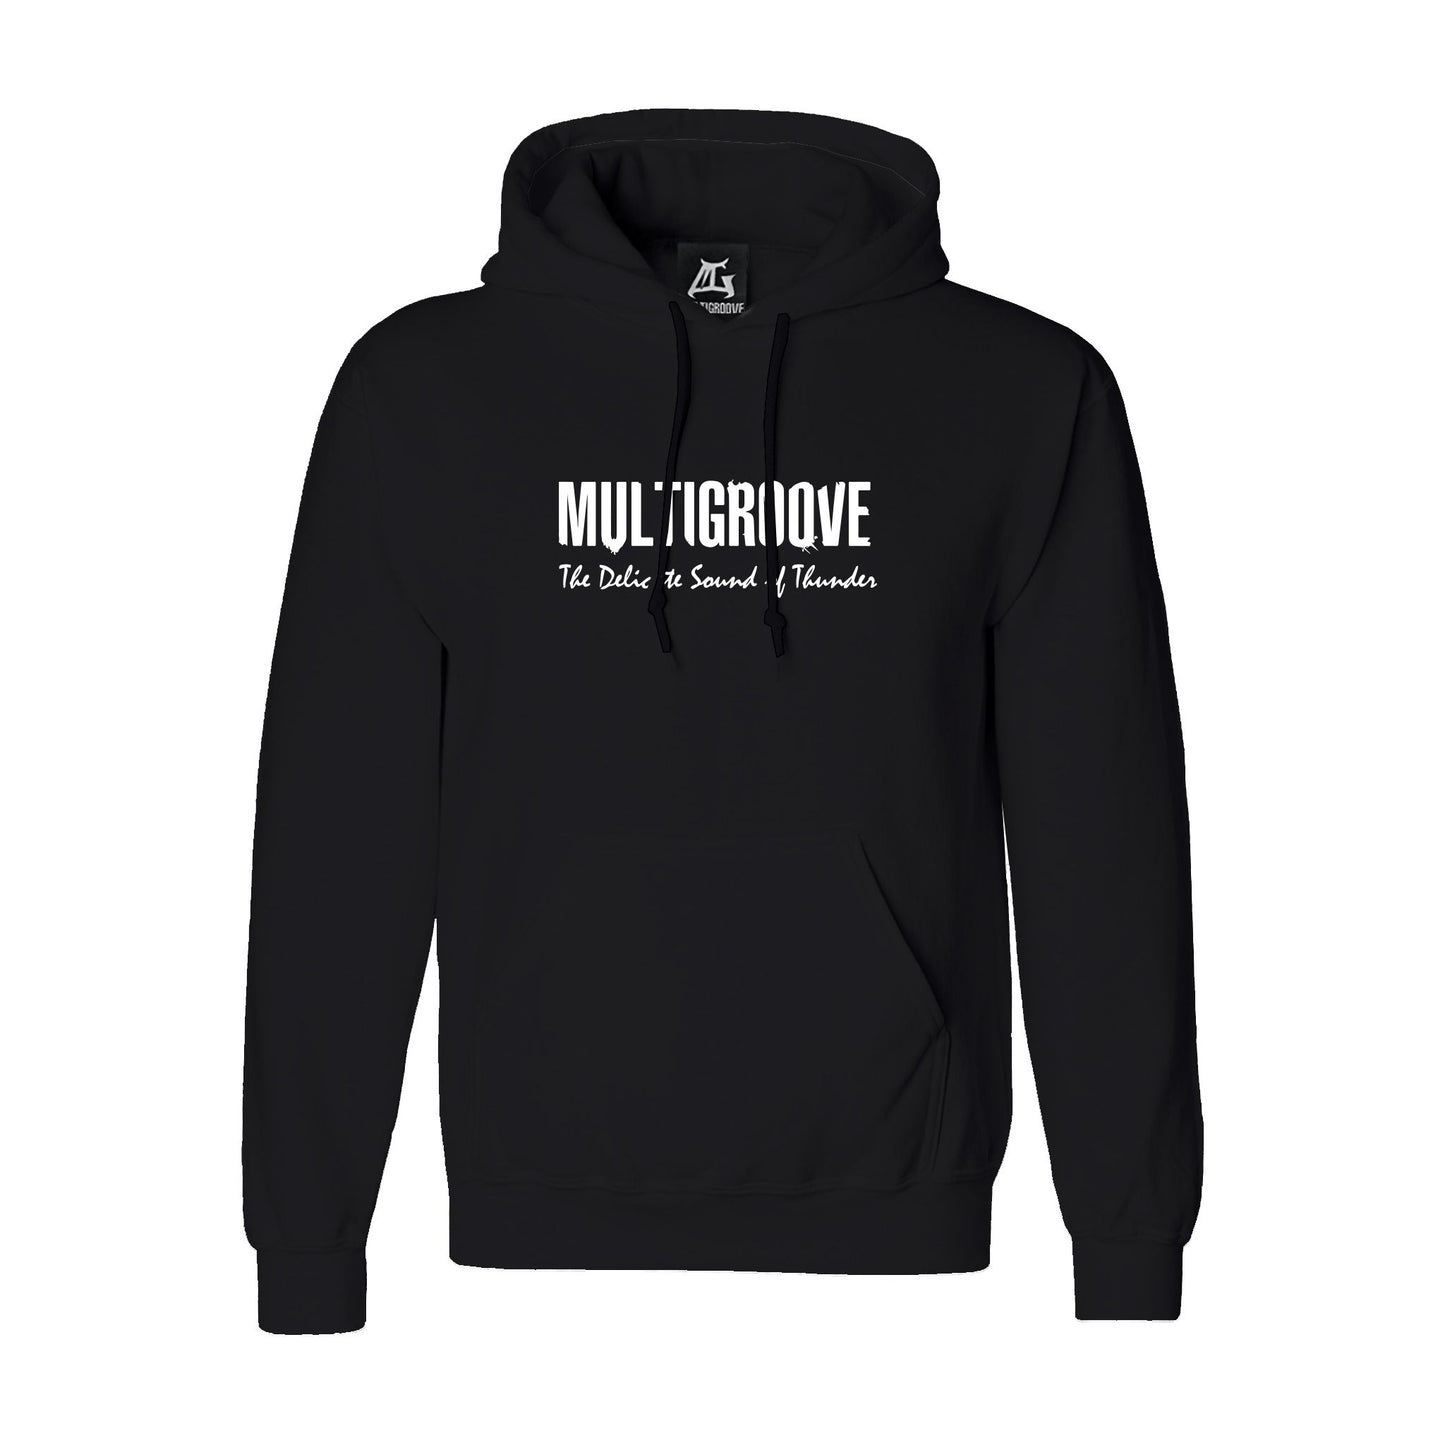 Multigroove hoodie The Delicate Sound of Thunder